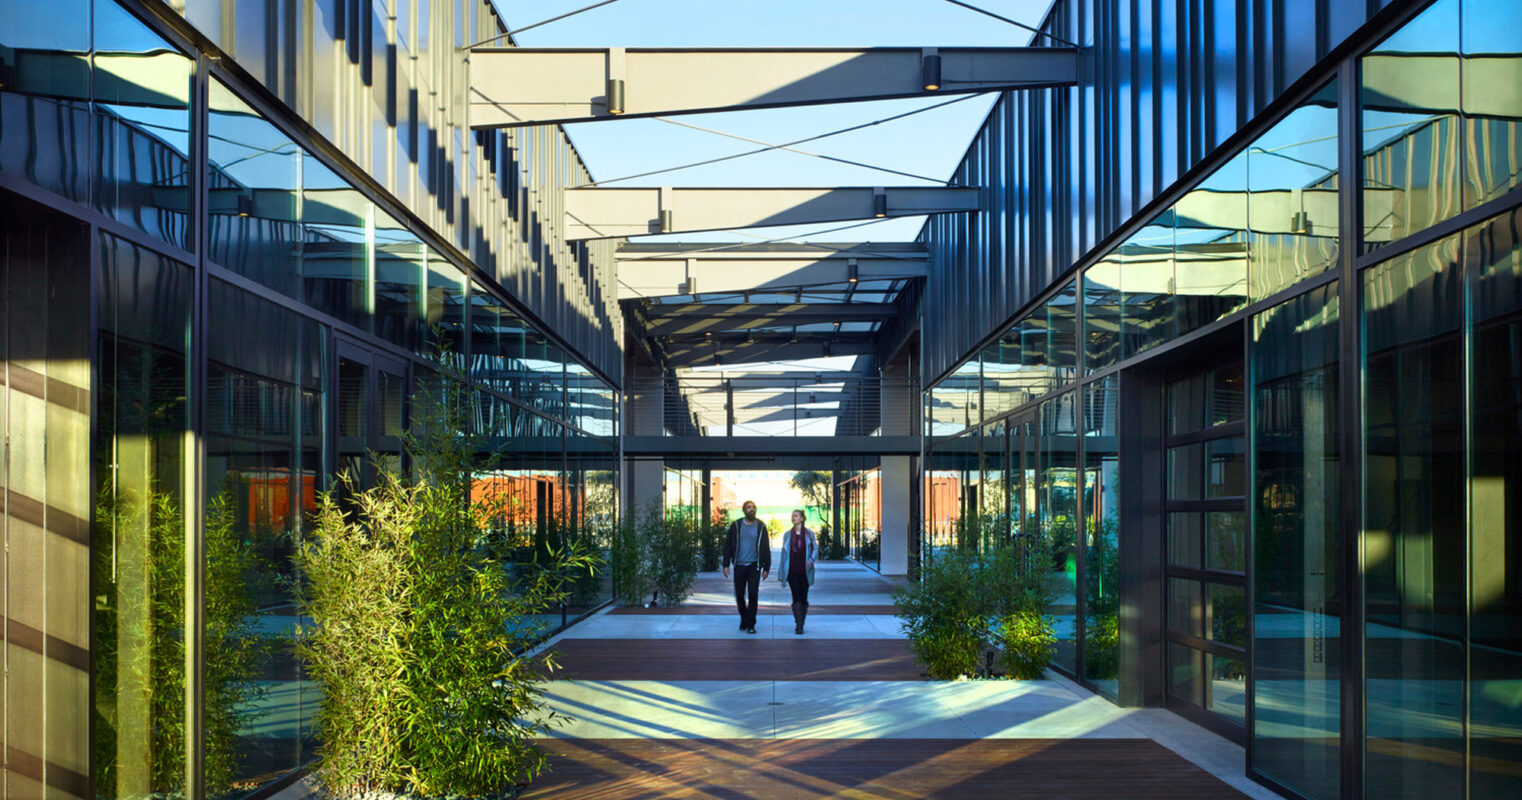 Modern corporate atrium with structured glass walls, reflecting sunlight and sky. Overhead beams and cables add an industrial feel, while green plant beds infuse a natural touch into the geometric space. Pedestrians stroll along the wooden pathway, adding a sense of scale and human interaction.